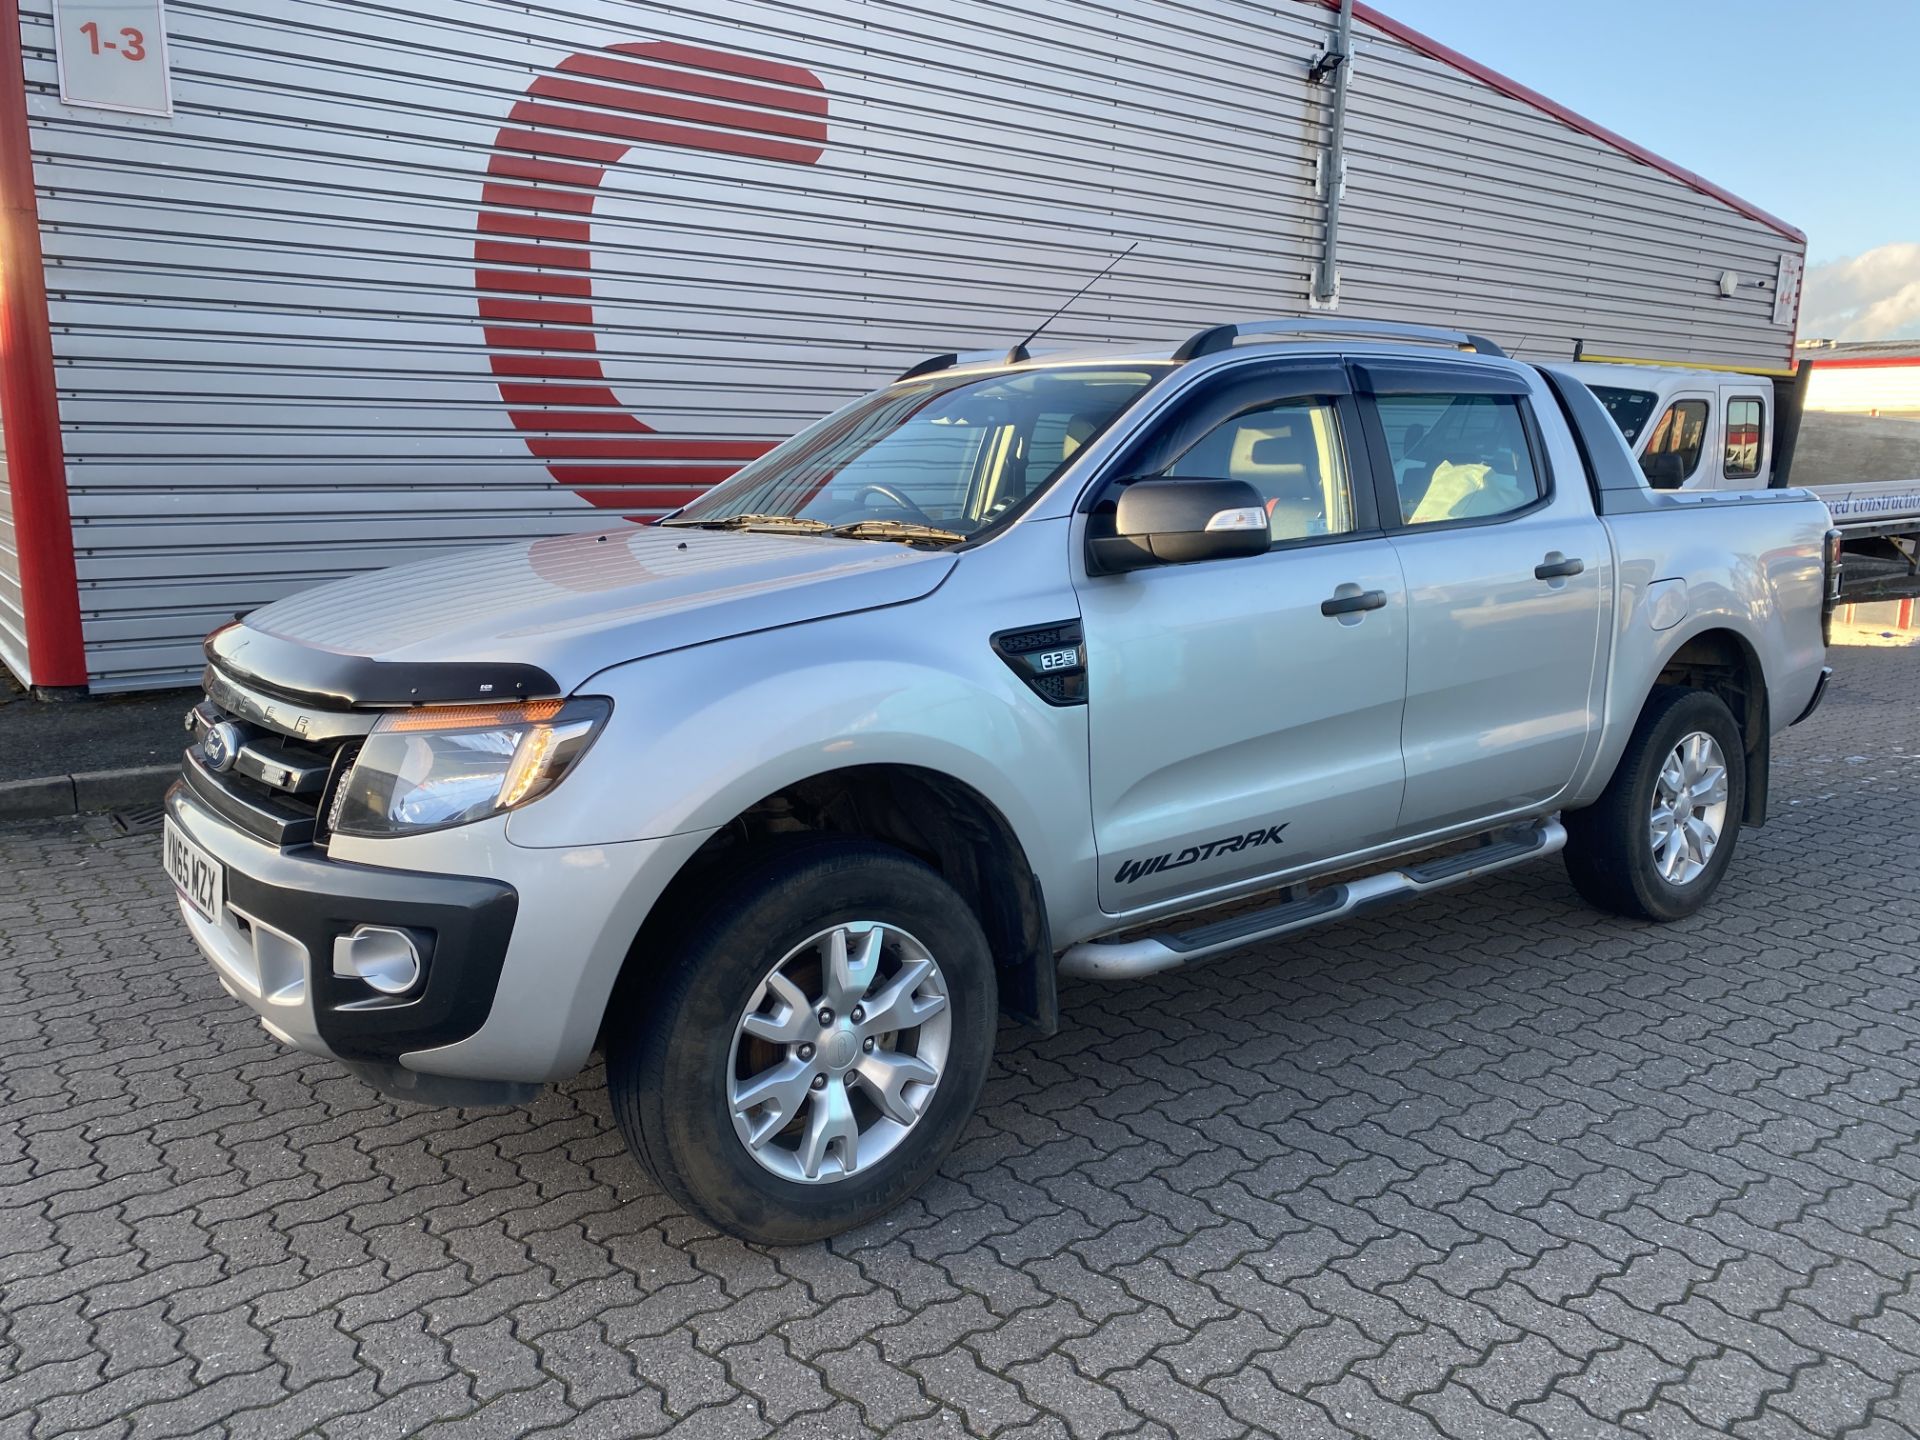 Ford Ranger Wildtrak 4 x 4 3.2 TDCI 6 Speed Automatic Double Cab Pick Up Truck, Silver - Image 4 of 30